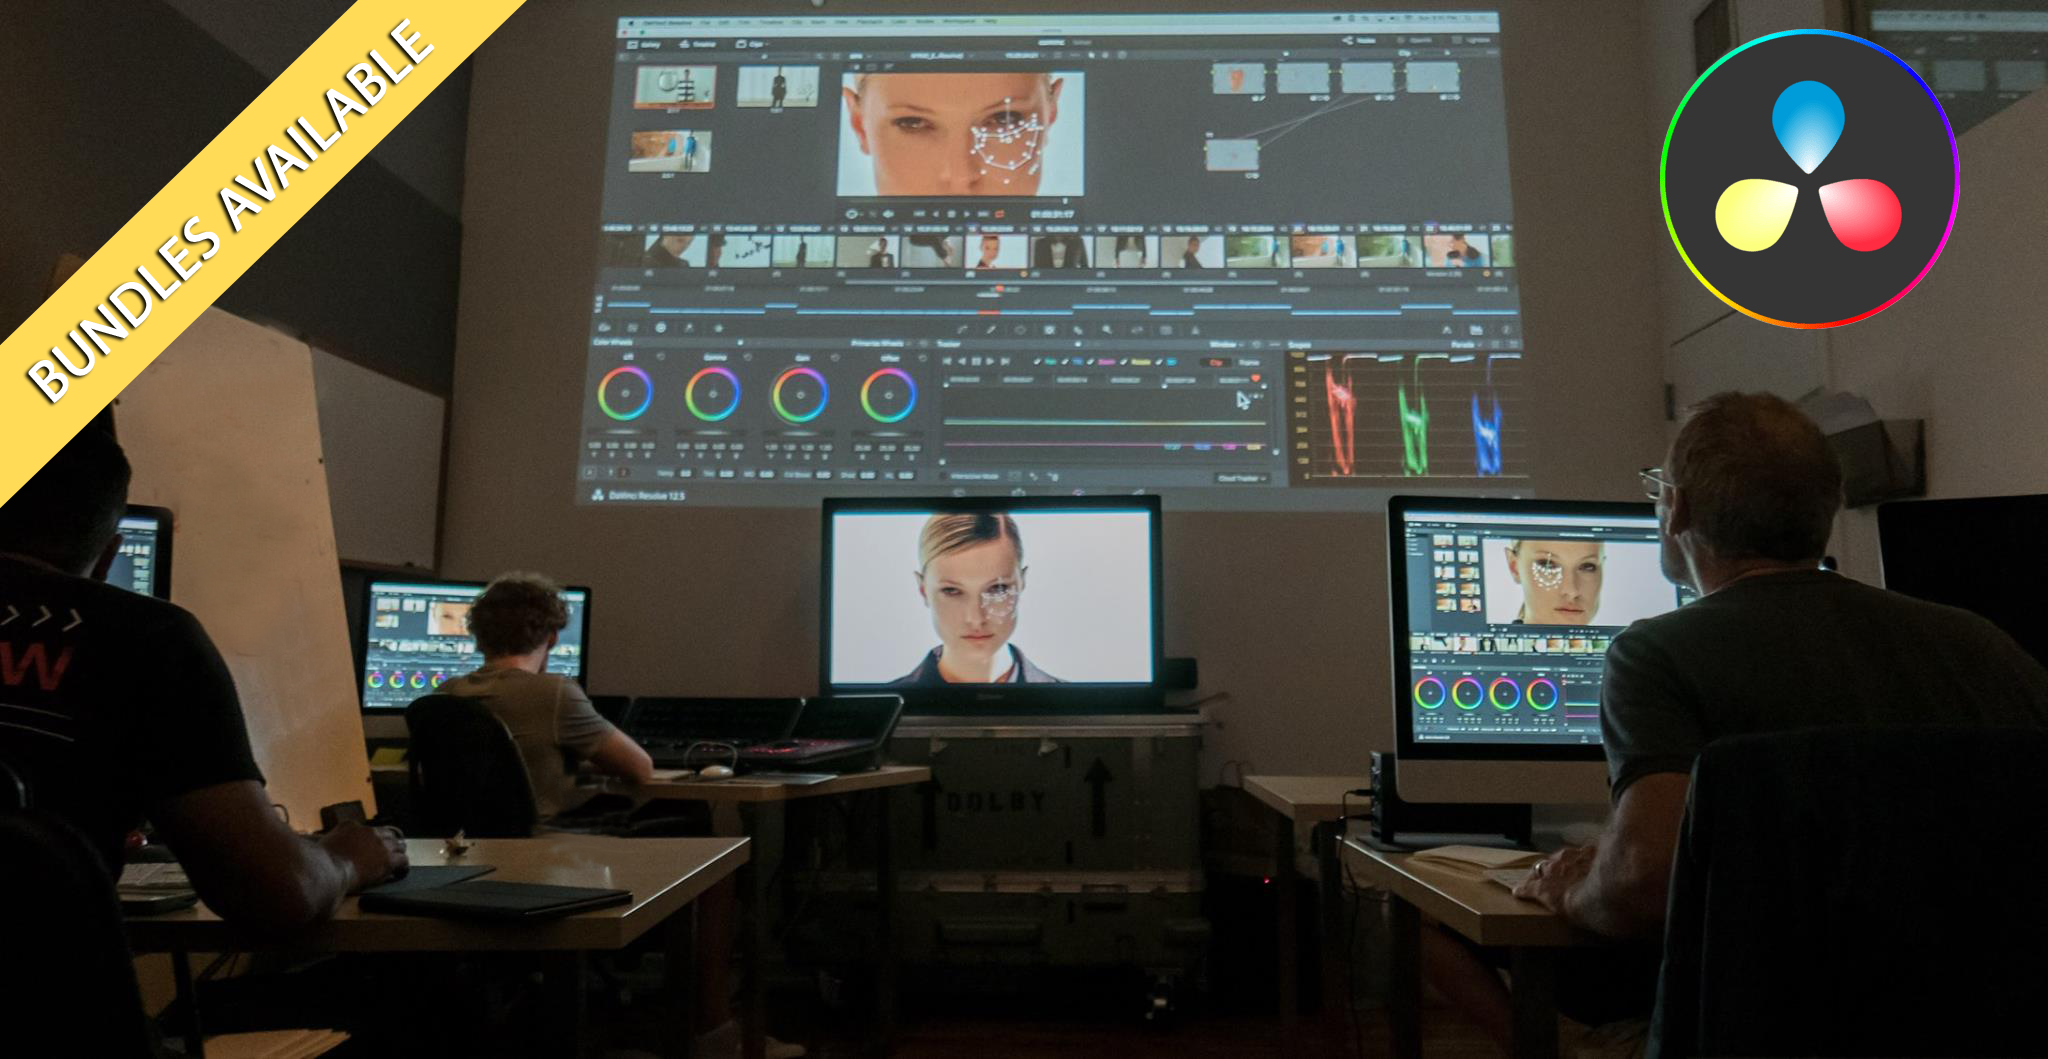  Our COL 101: Introduction to Color Grading With Resolve starts May 13th!  Classes filling up - Register HERE! 